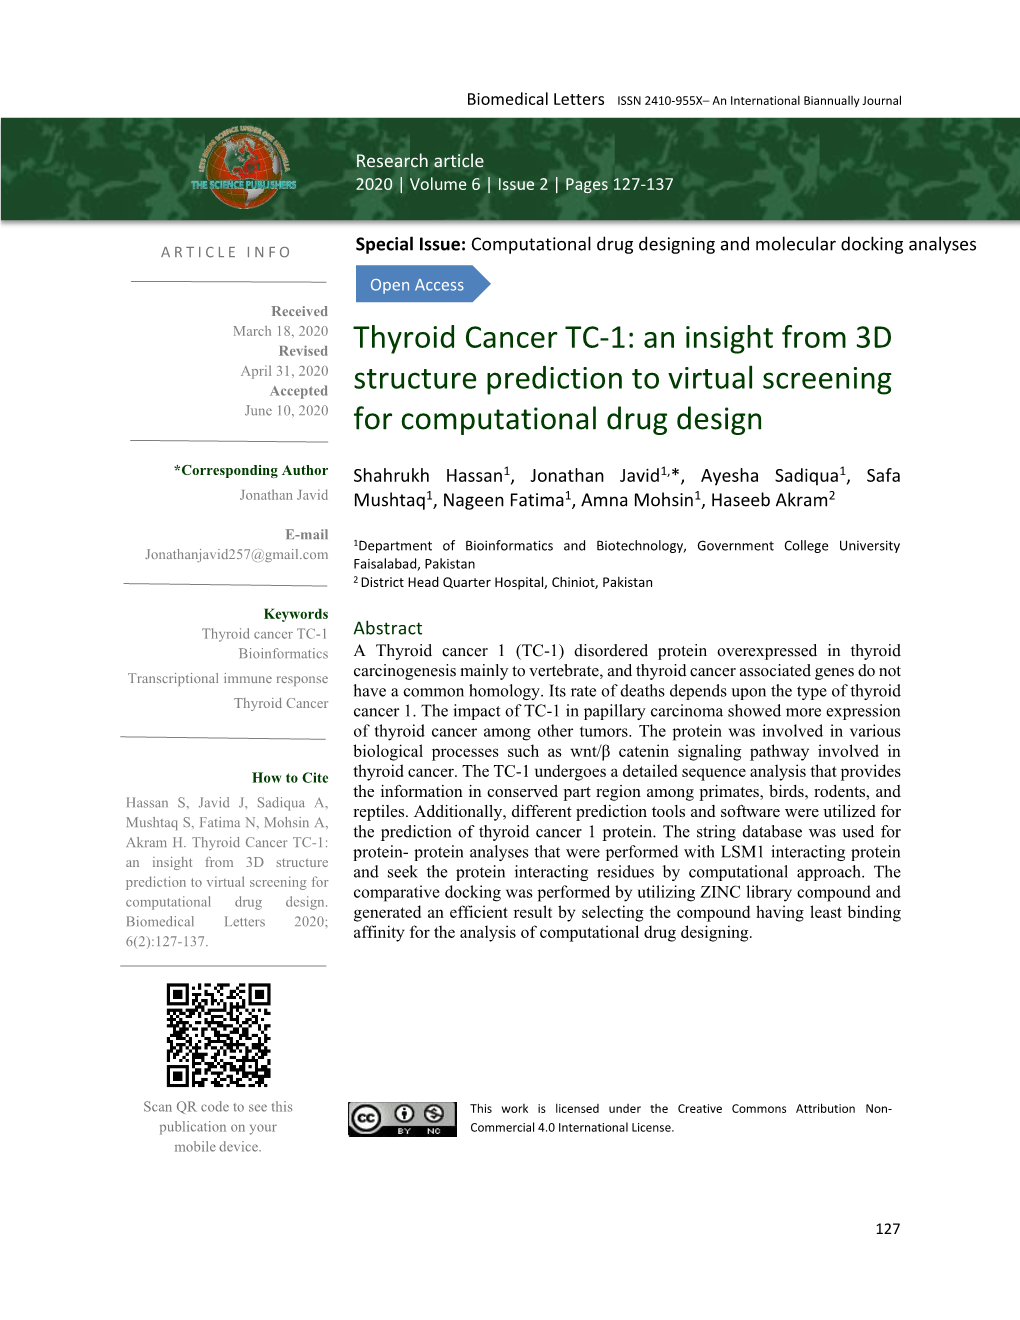 Thyroid Cancer TC-1: an Insight from 3D April 31, 2020 Accepted Structure Prediction to Virtual Screening June 10, 2020 for Computational Drug Design